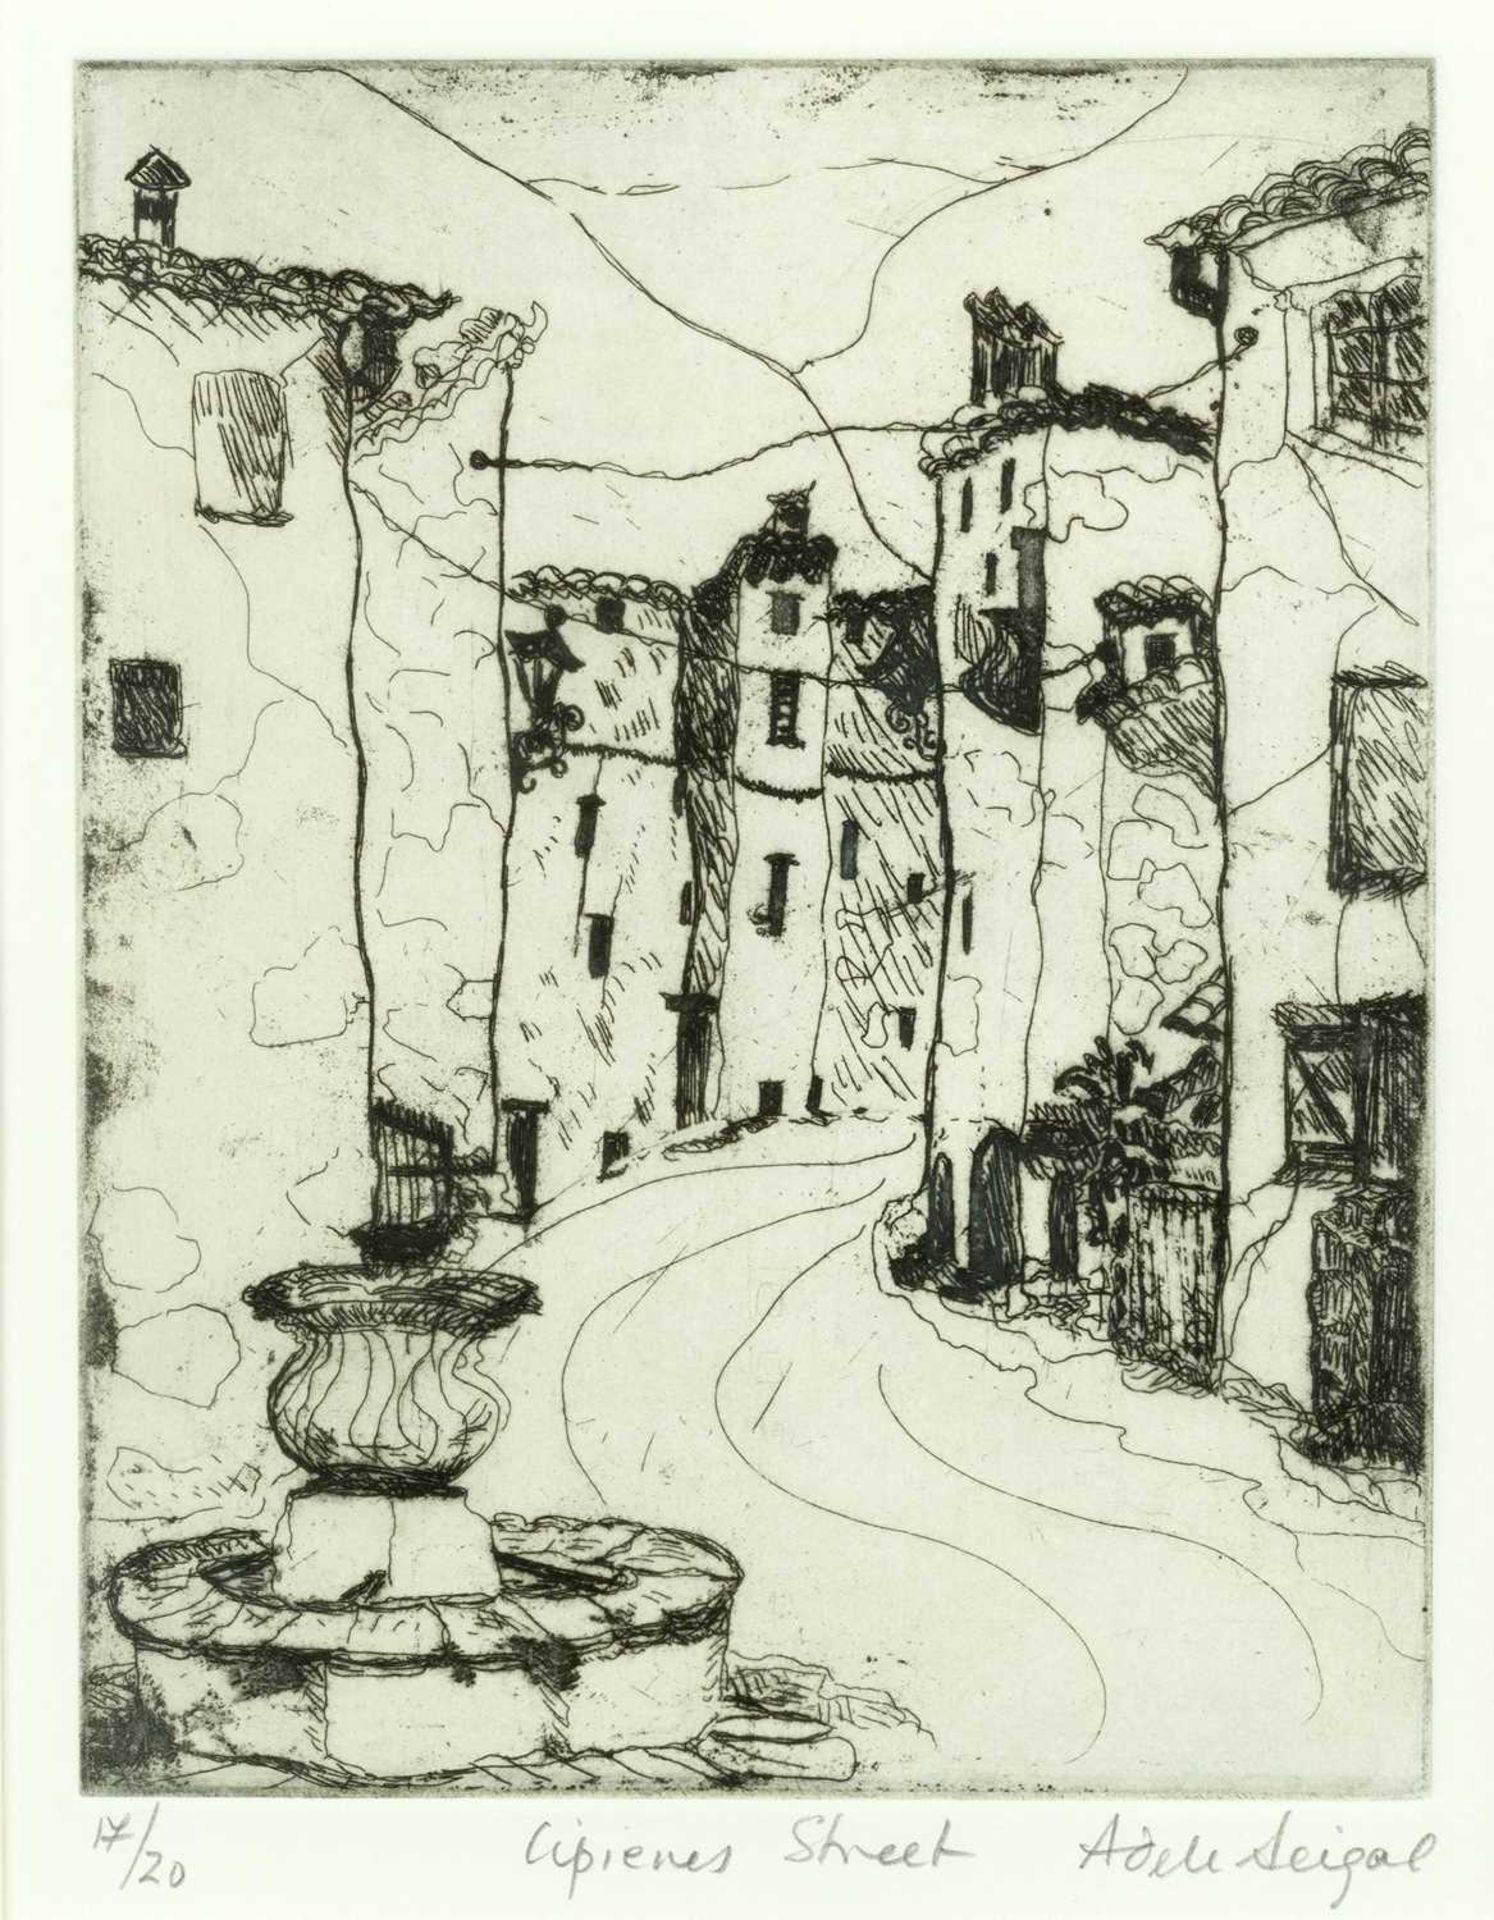 Adele Seigal (20th Century) Cipienes Street 17/20, signed, titled, and numbered in pencil (in the